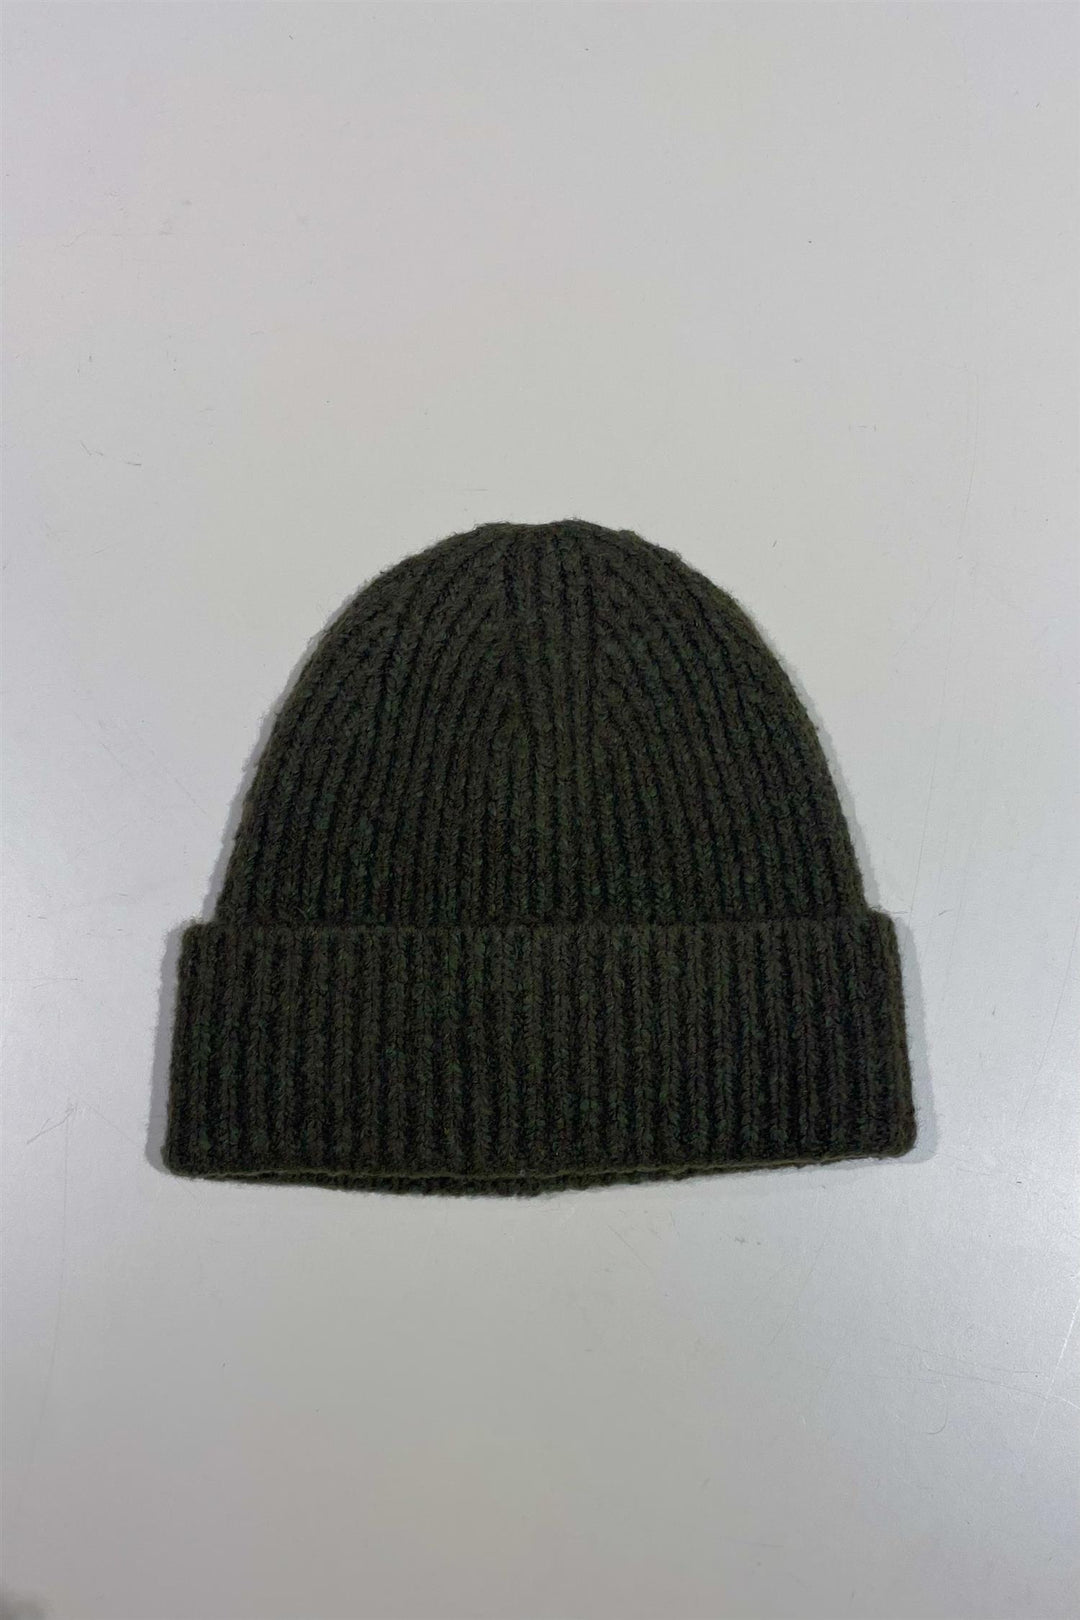 ACNE STUDIOS - RIBBED BEANIE HAT - FOREST GREEN - Dale